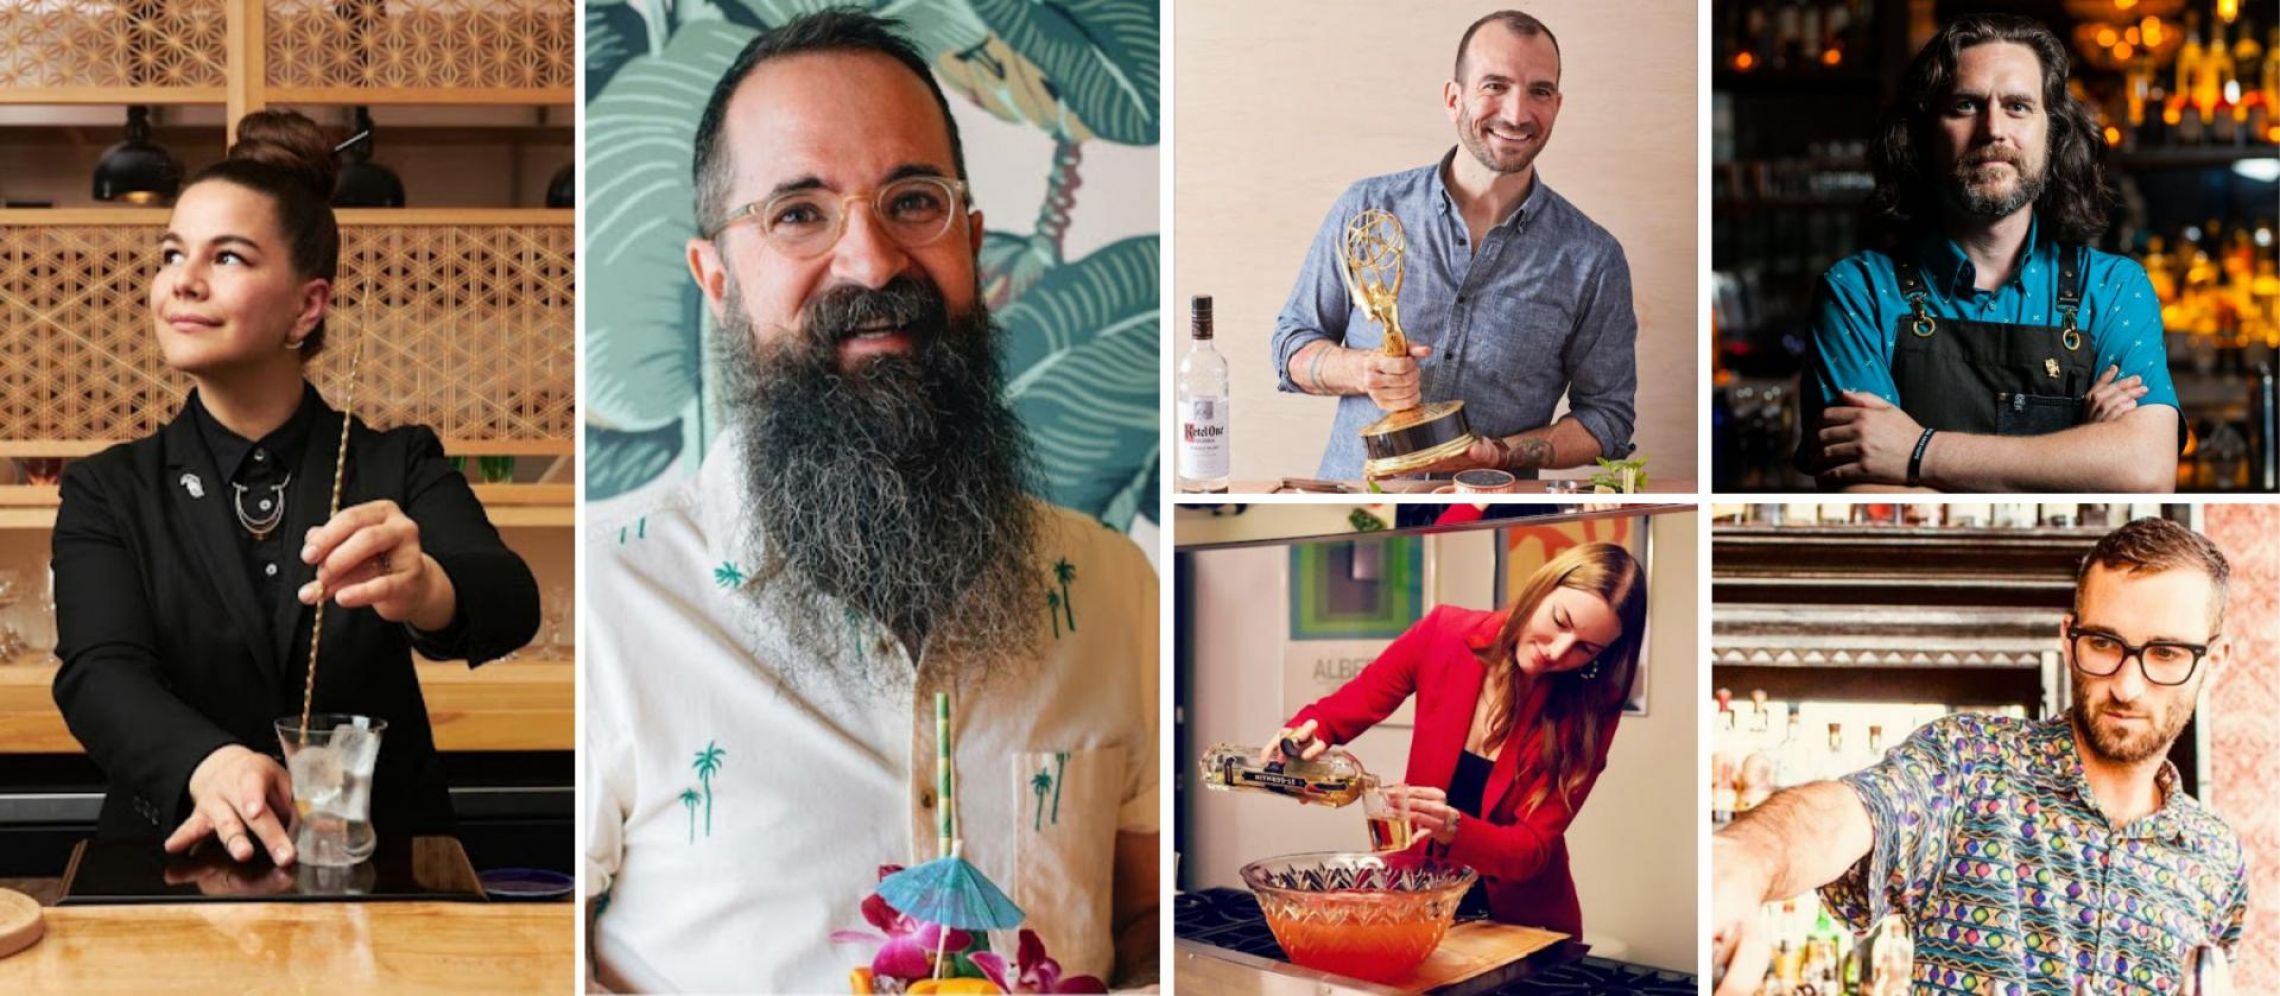 Photo for: Top 10 Bartenders Of Chicago To Watch Out For Right Now